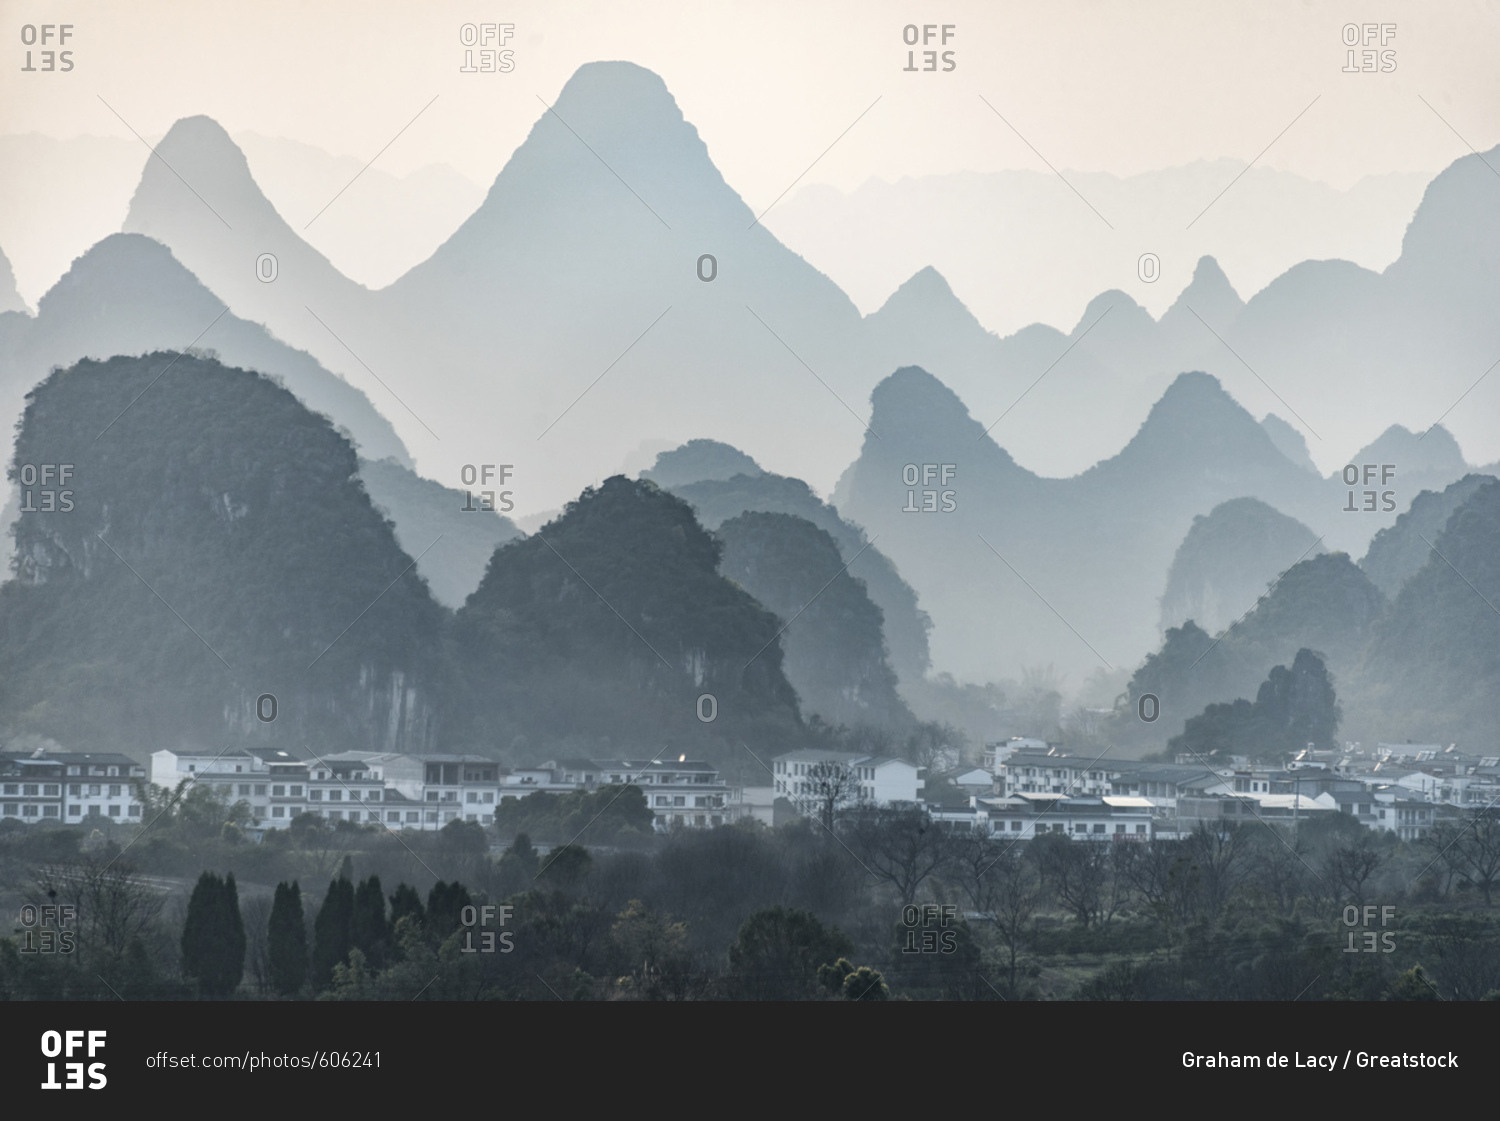 Guilin with mountainous landscape in the background